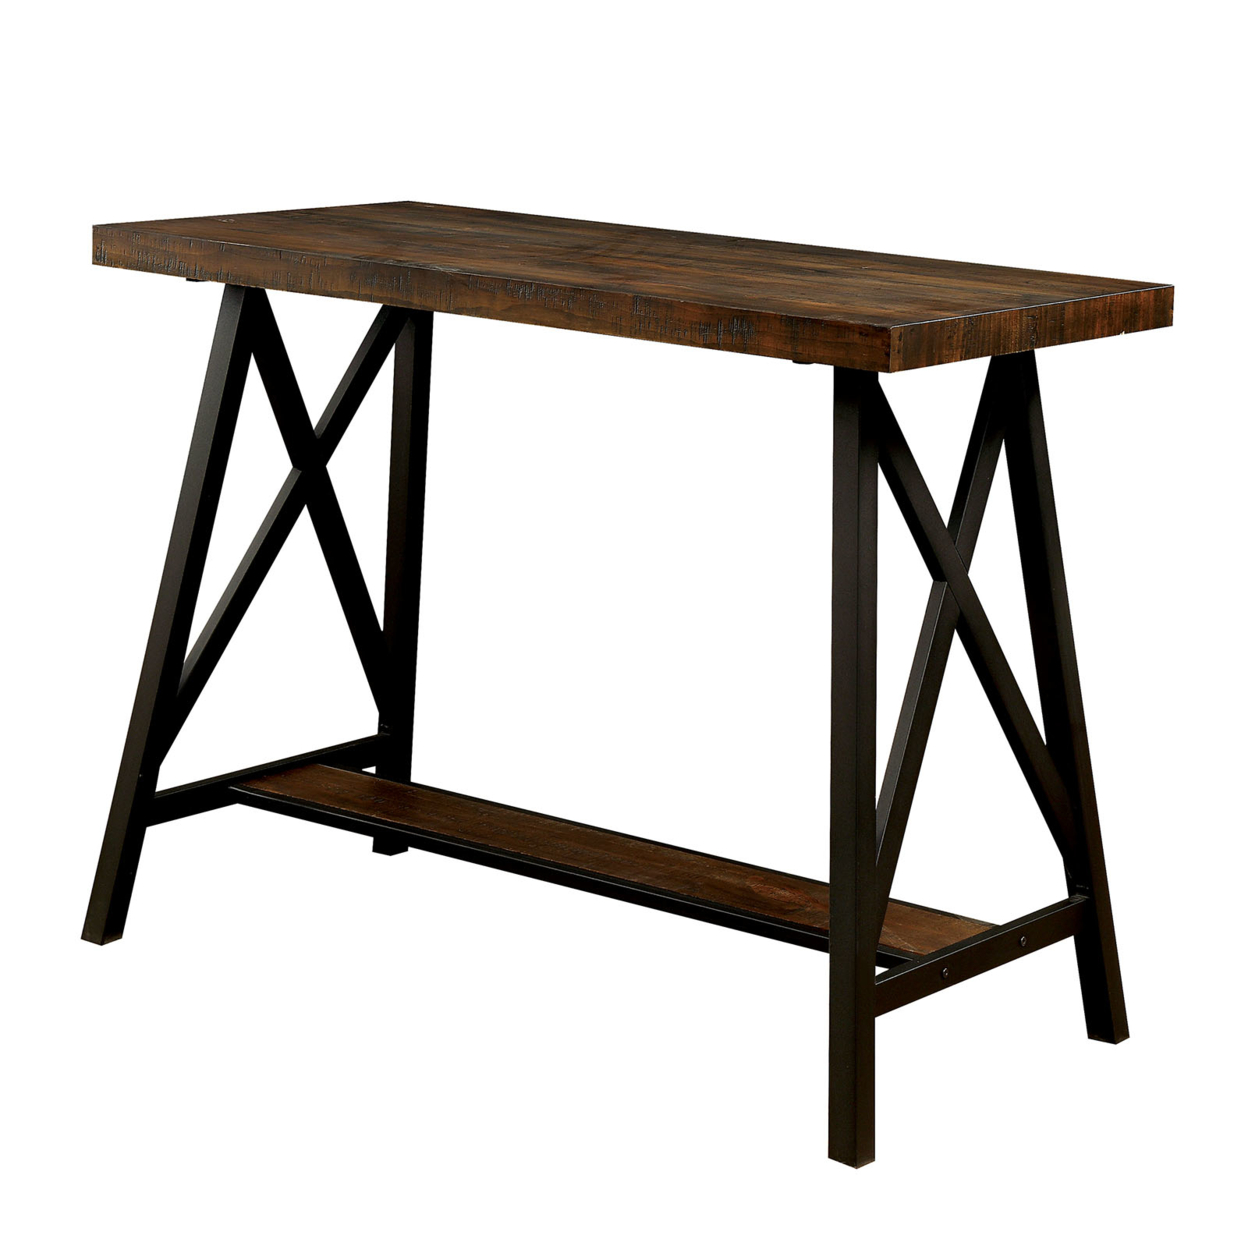 Wooden Counter Height Table With Angled Metal Legs, Black And Brown- Saltoro Sherpi